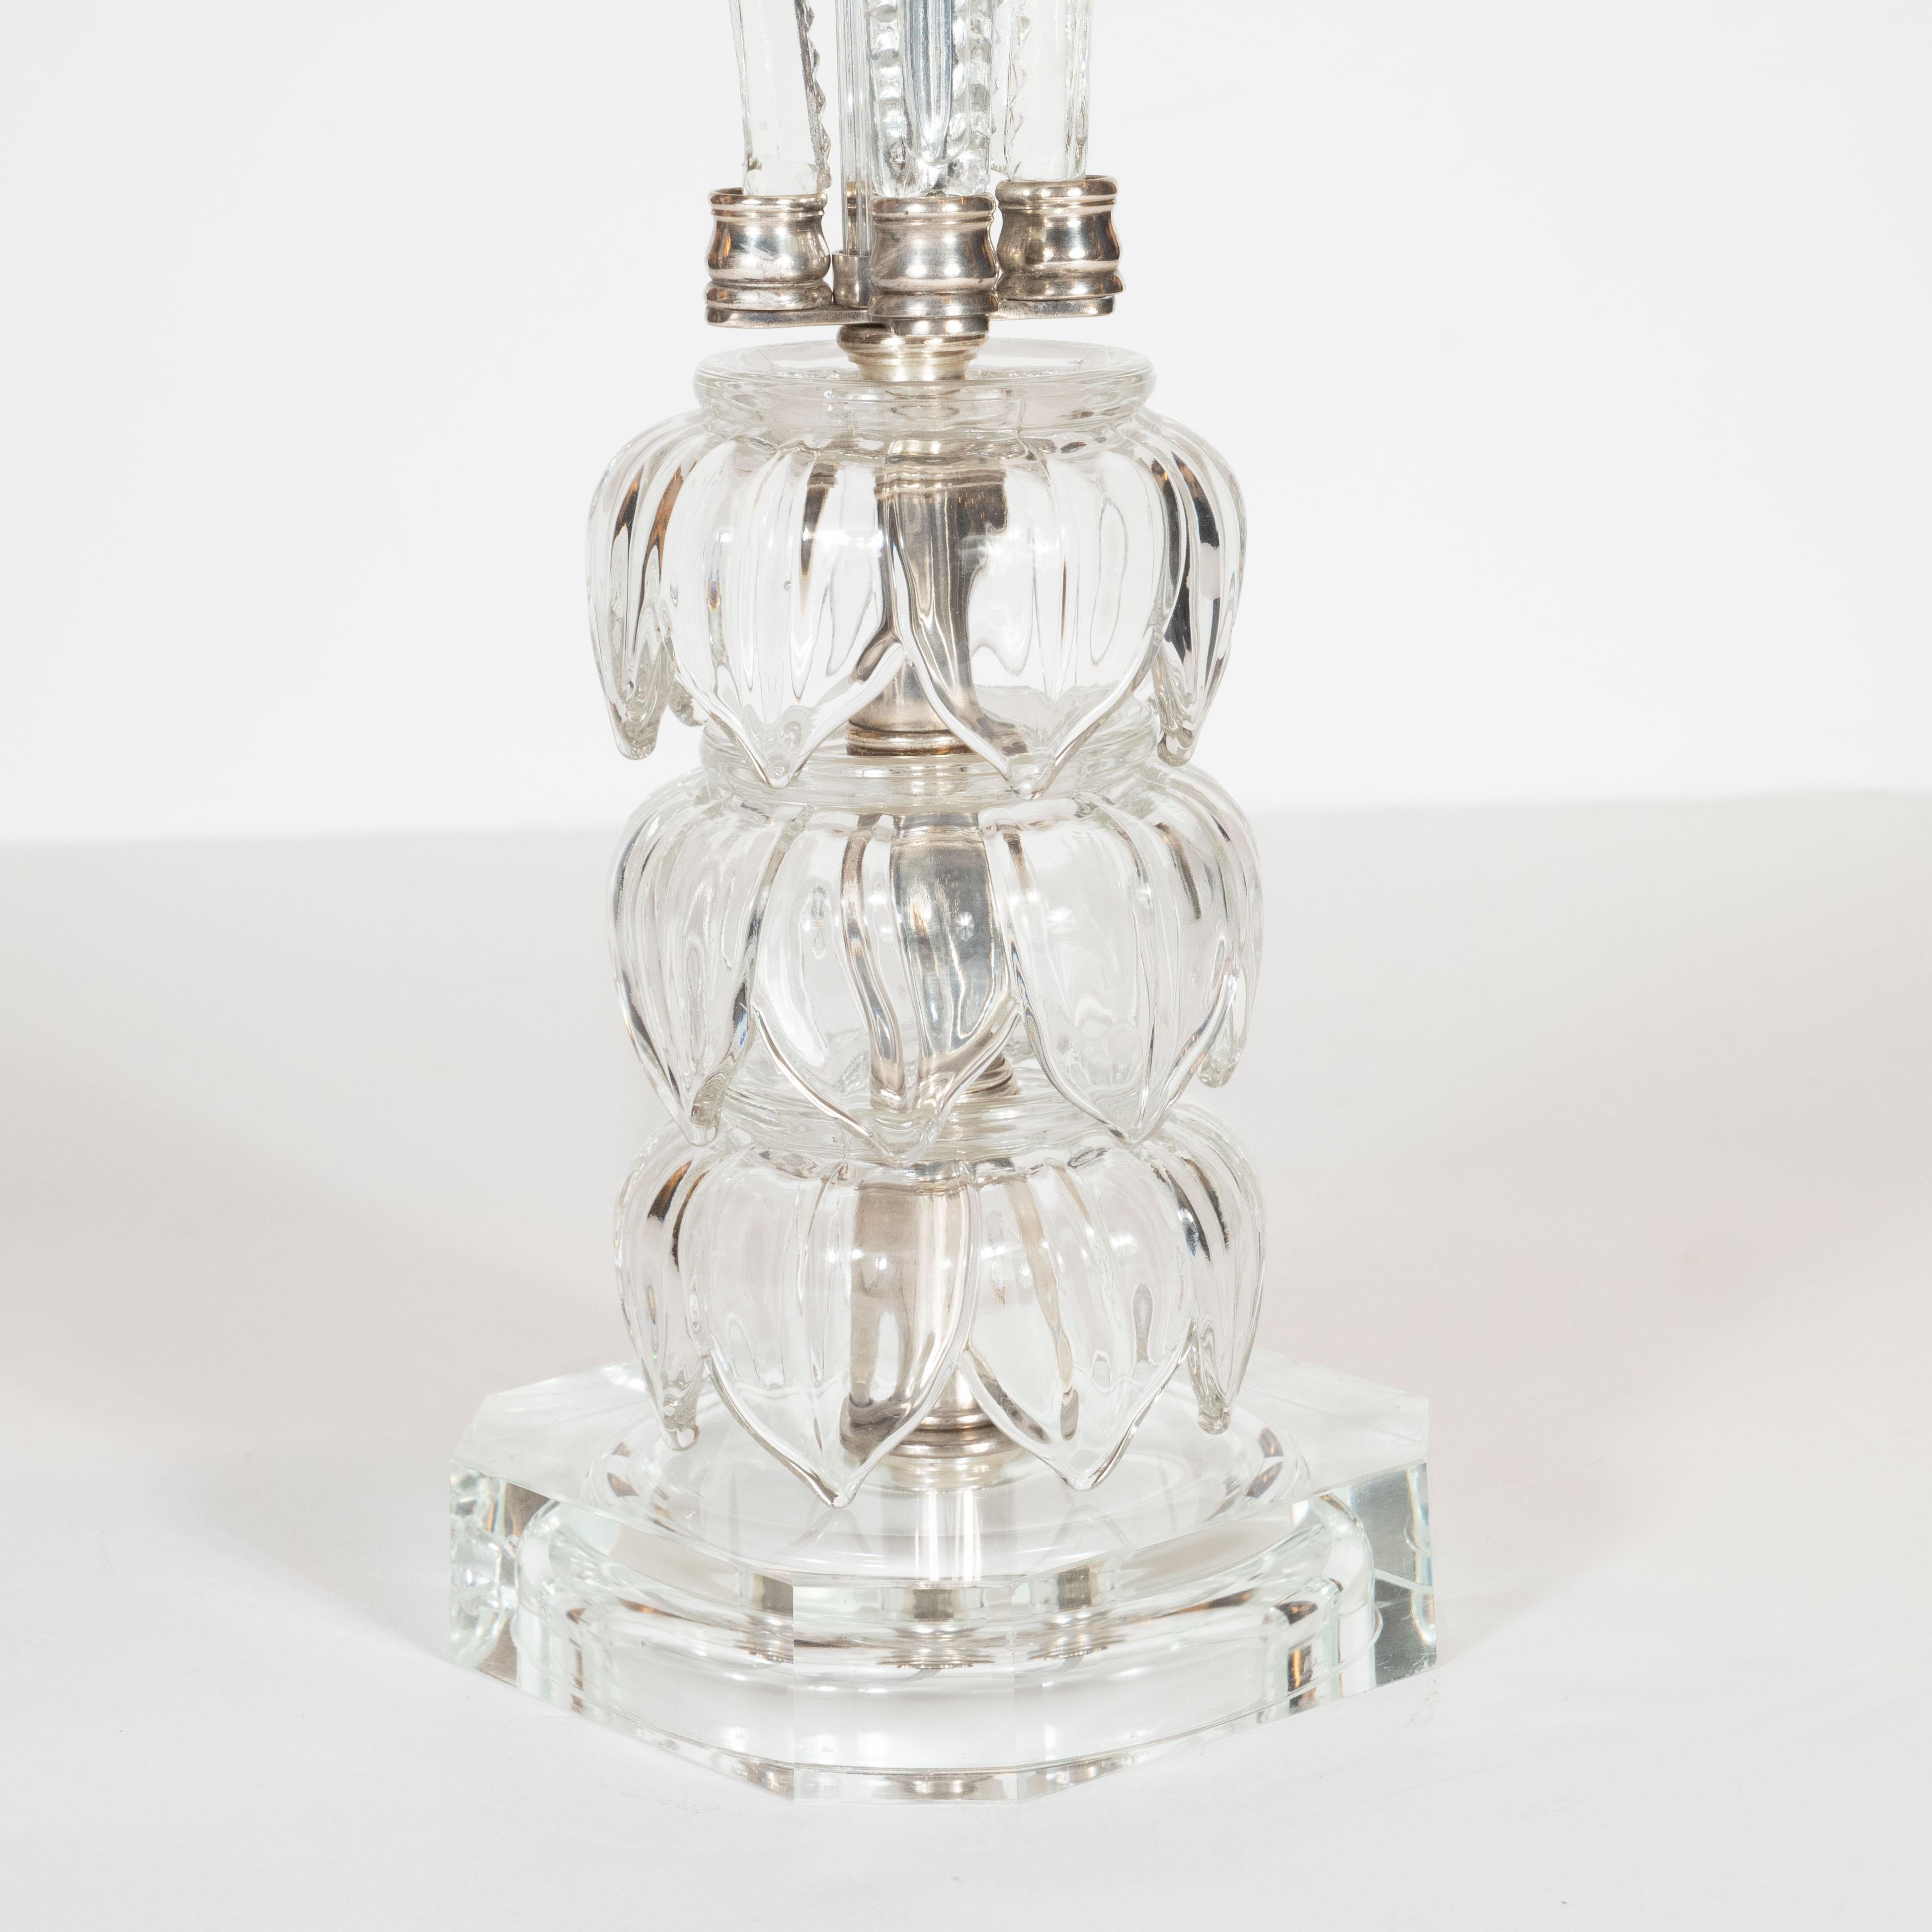 Silver Plate 1940s Hollywood Regency Translucent Cut Crystal Table Lamp with Acanthus Details For Sale